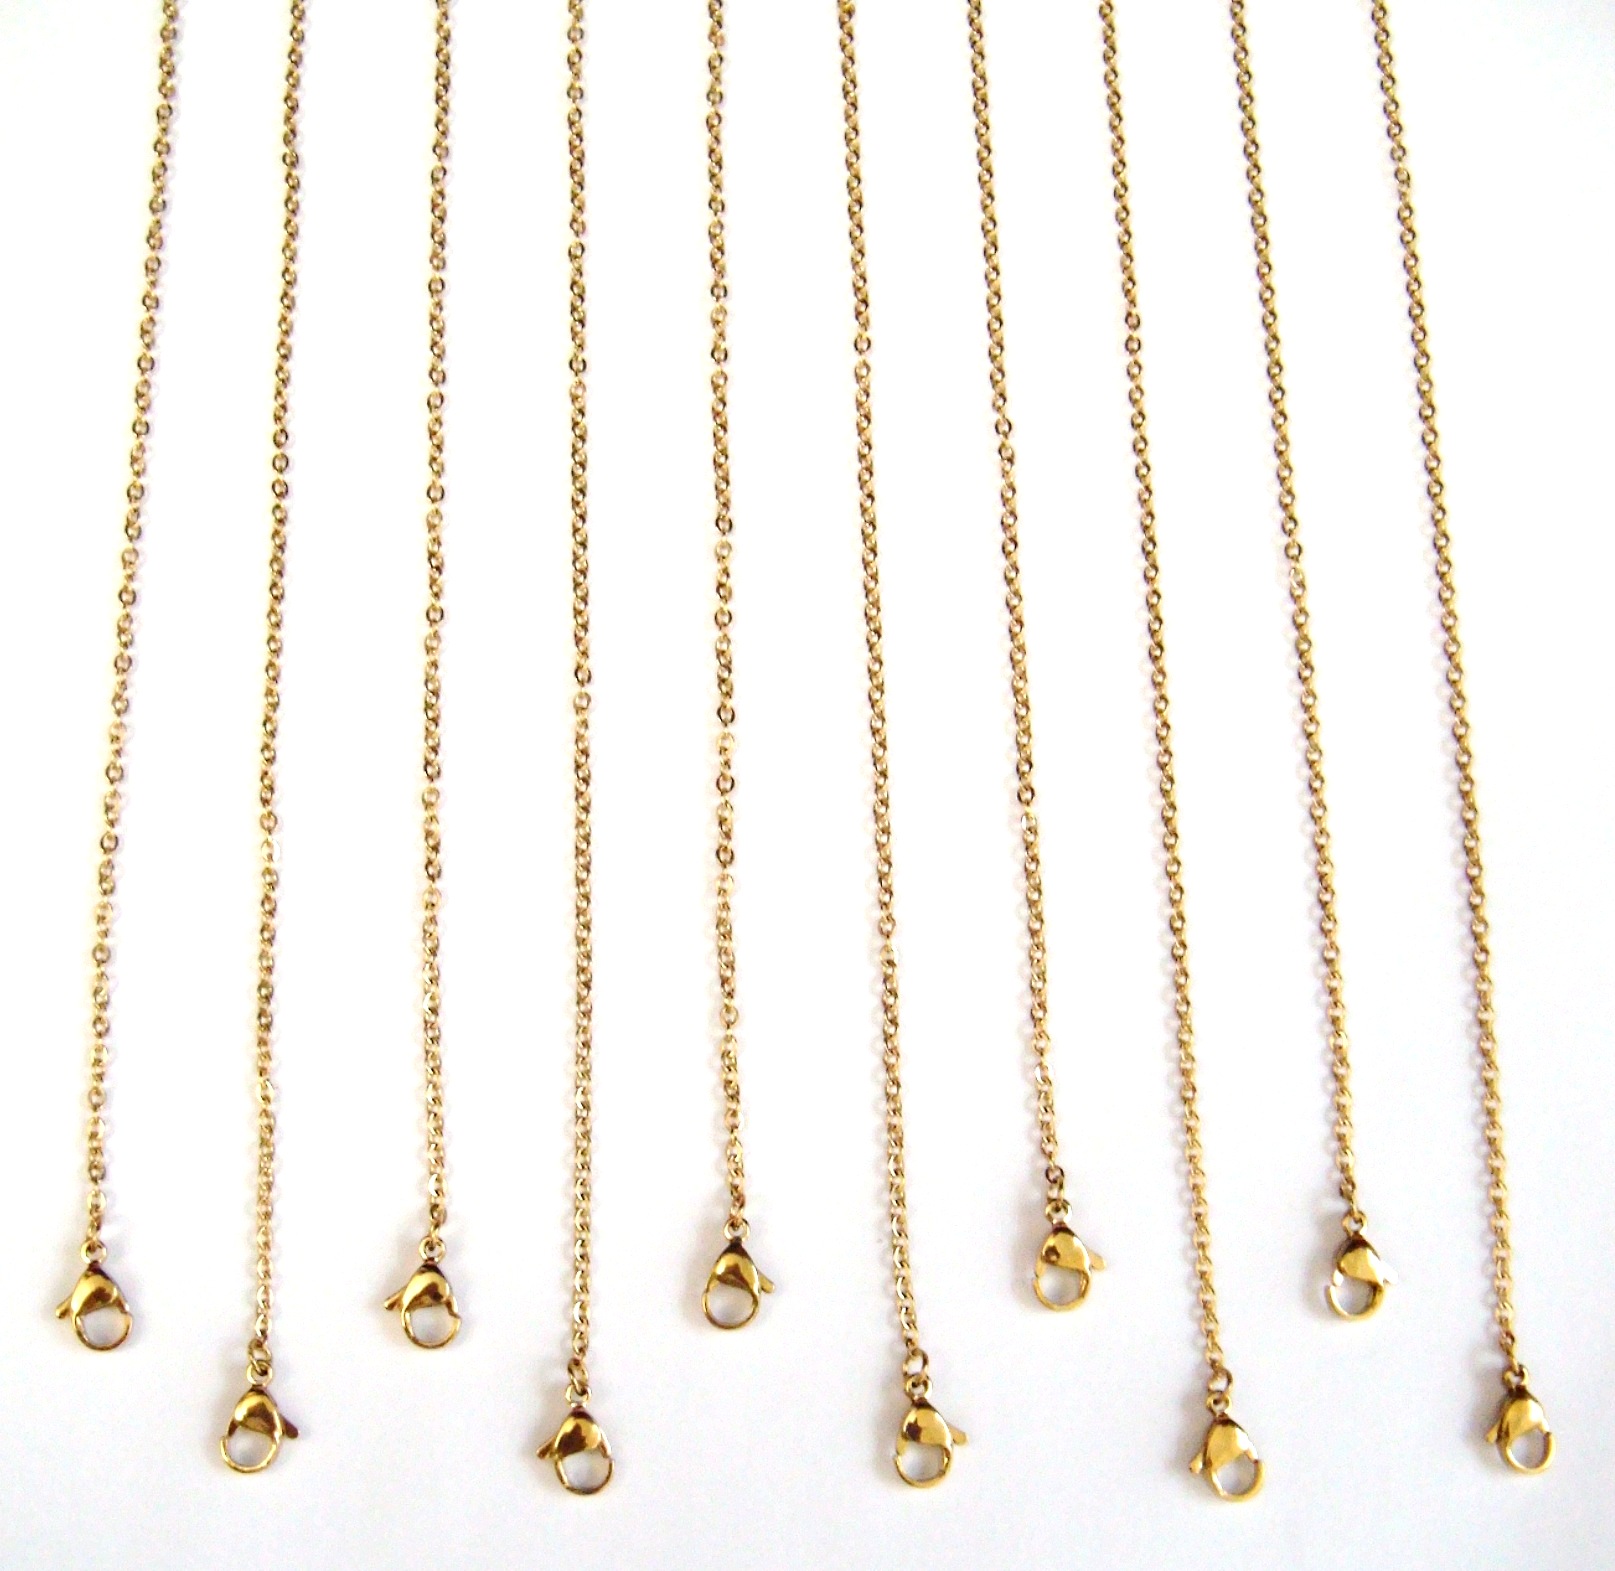 10 PC. 2mm Curb Gold Plated Over Stainless Steel Chains # SSG